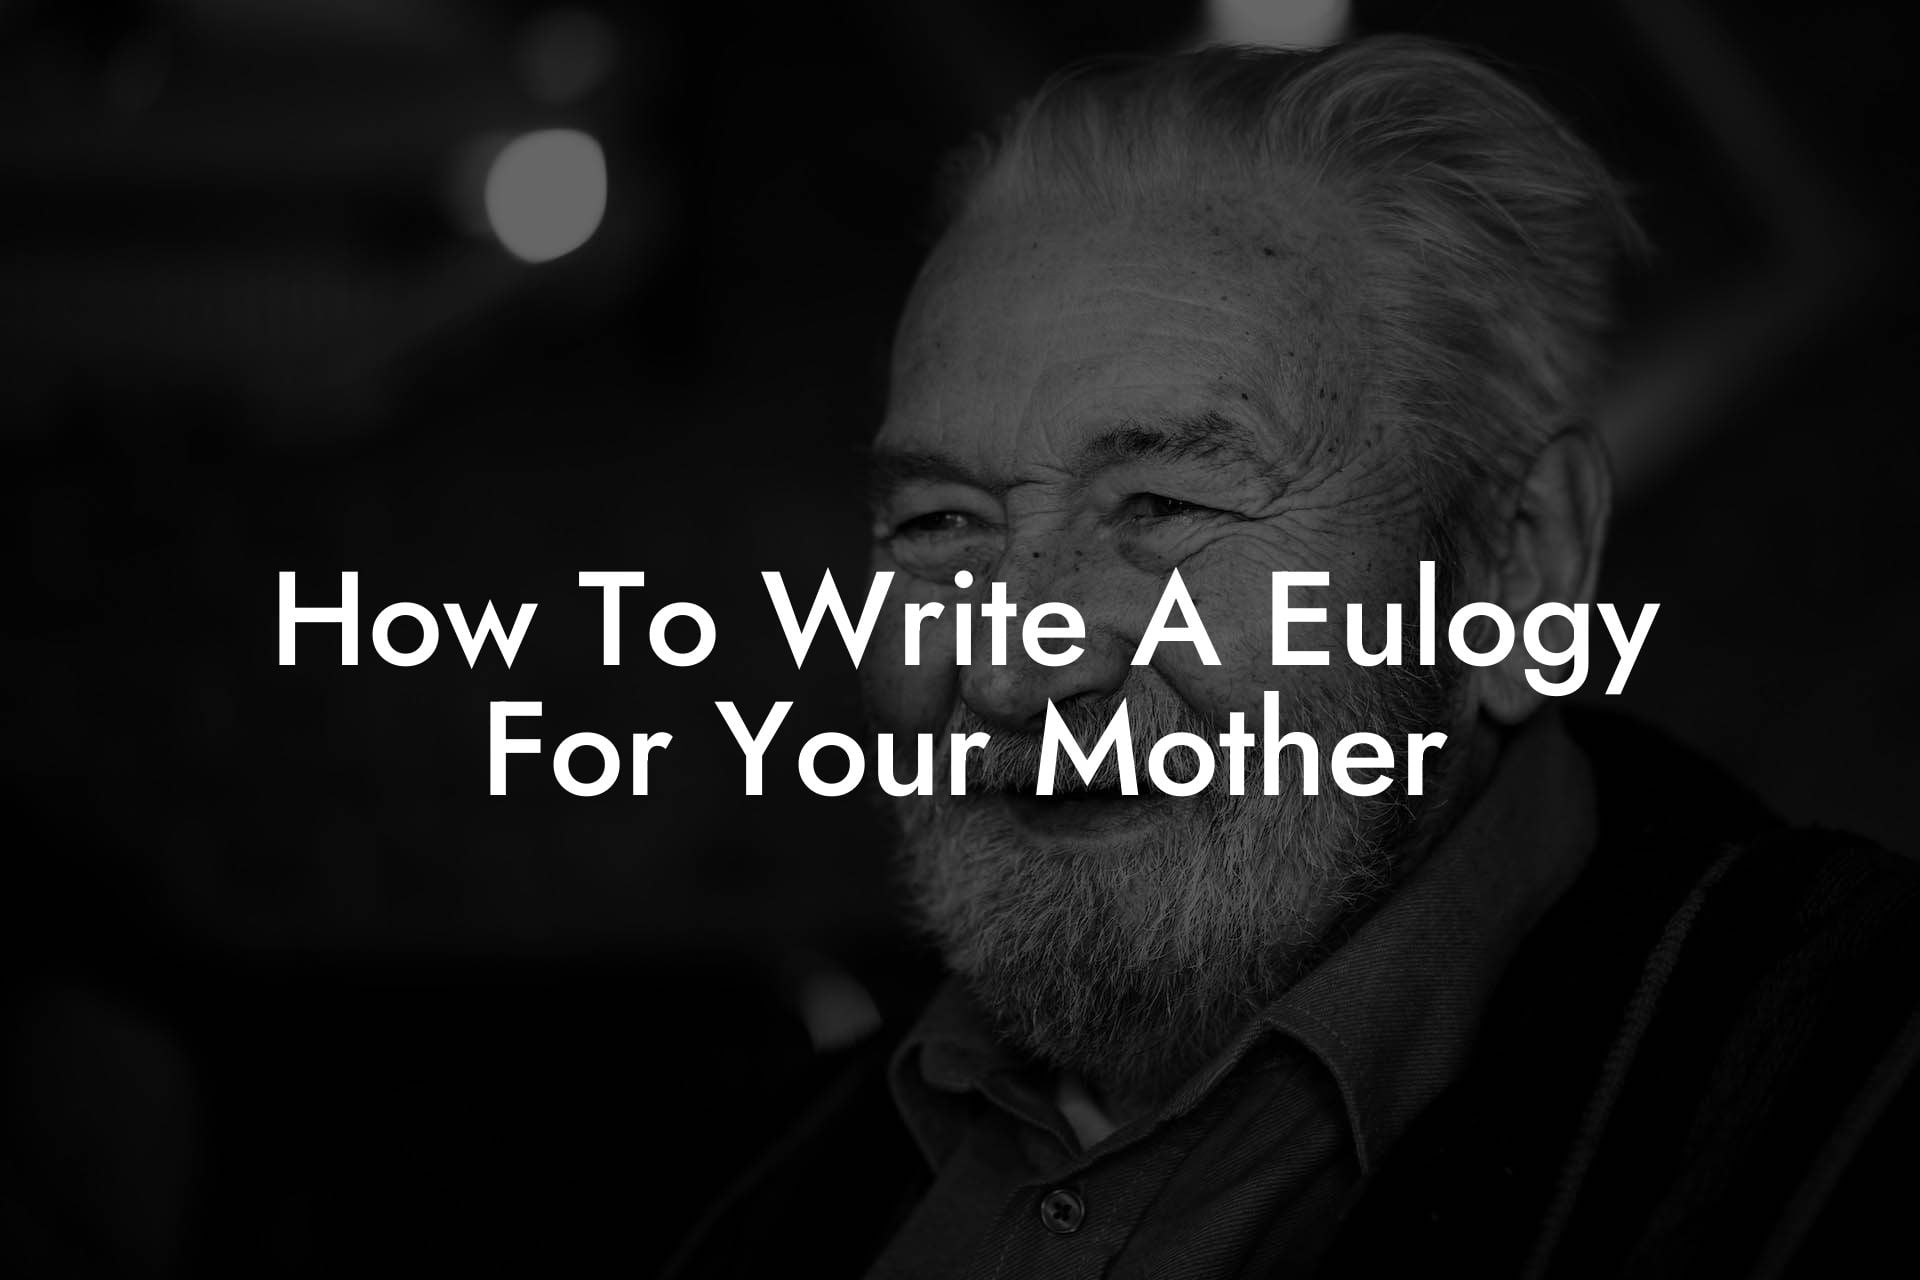 How To Write A Eulogy For Your Mother